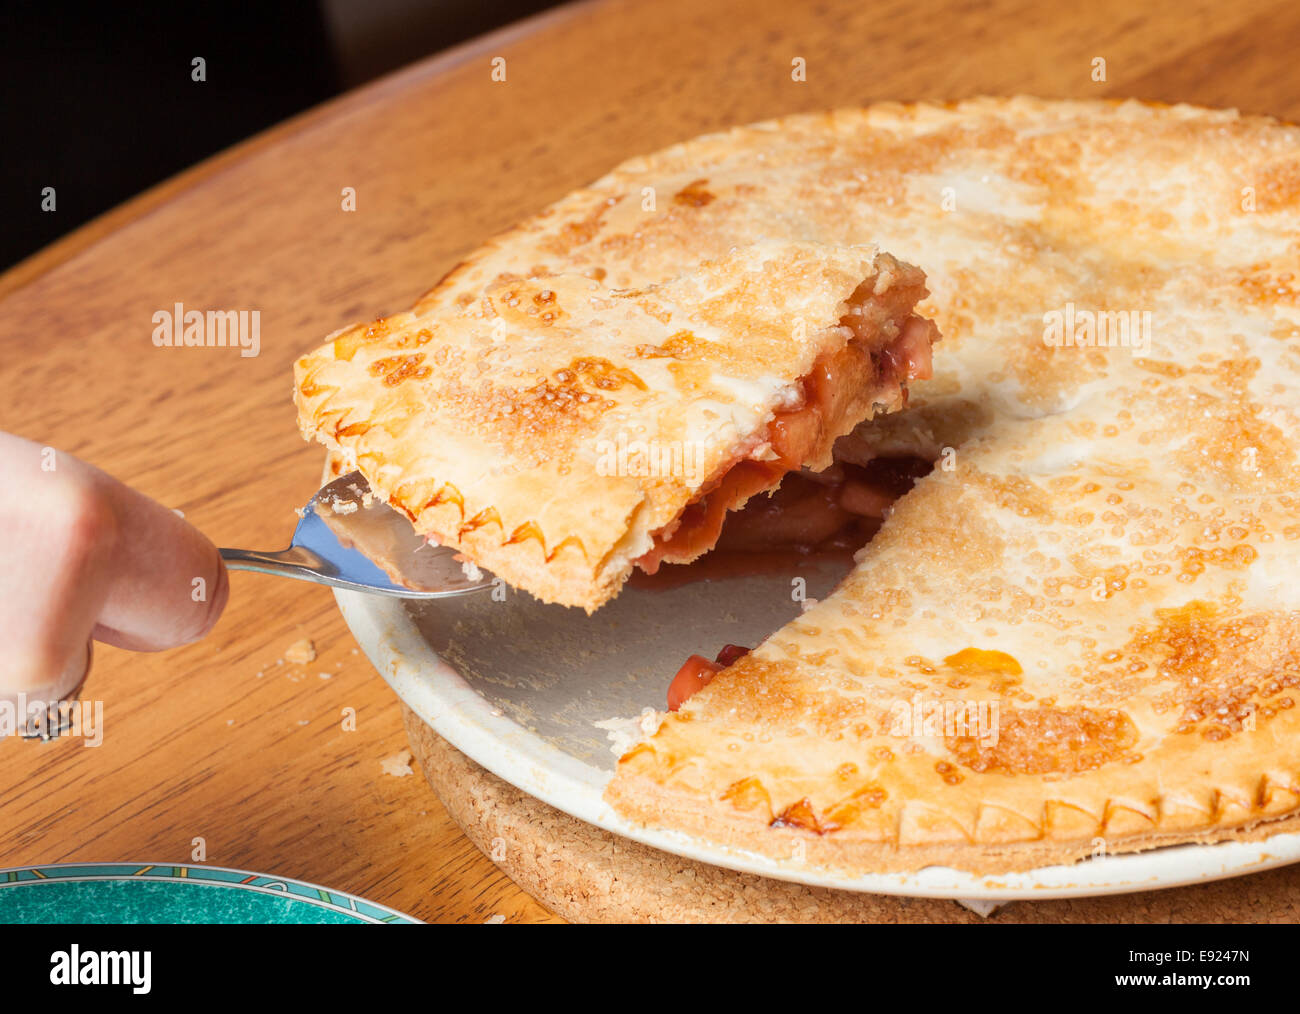 Home made apple and strawberry pie served Stock Photo